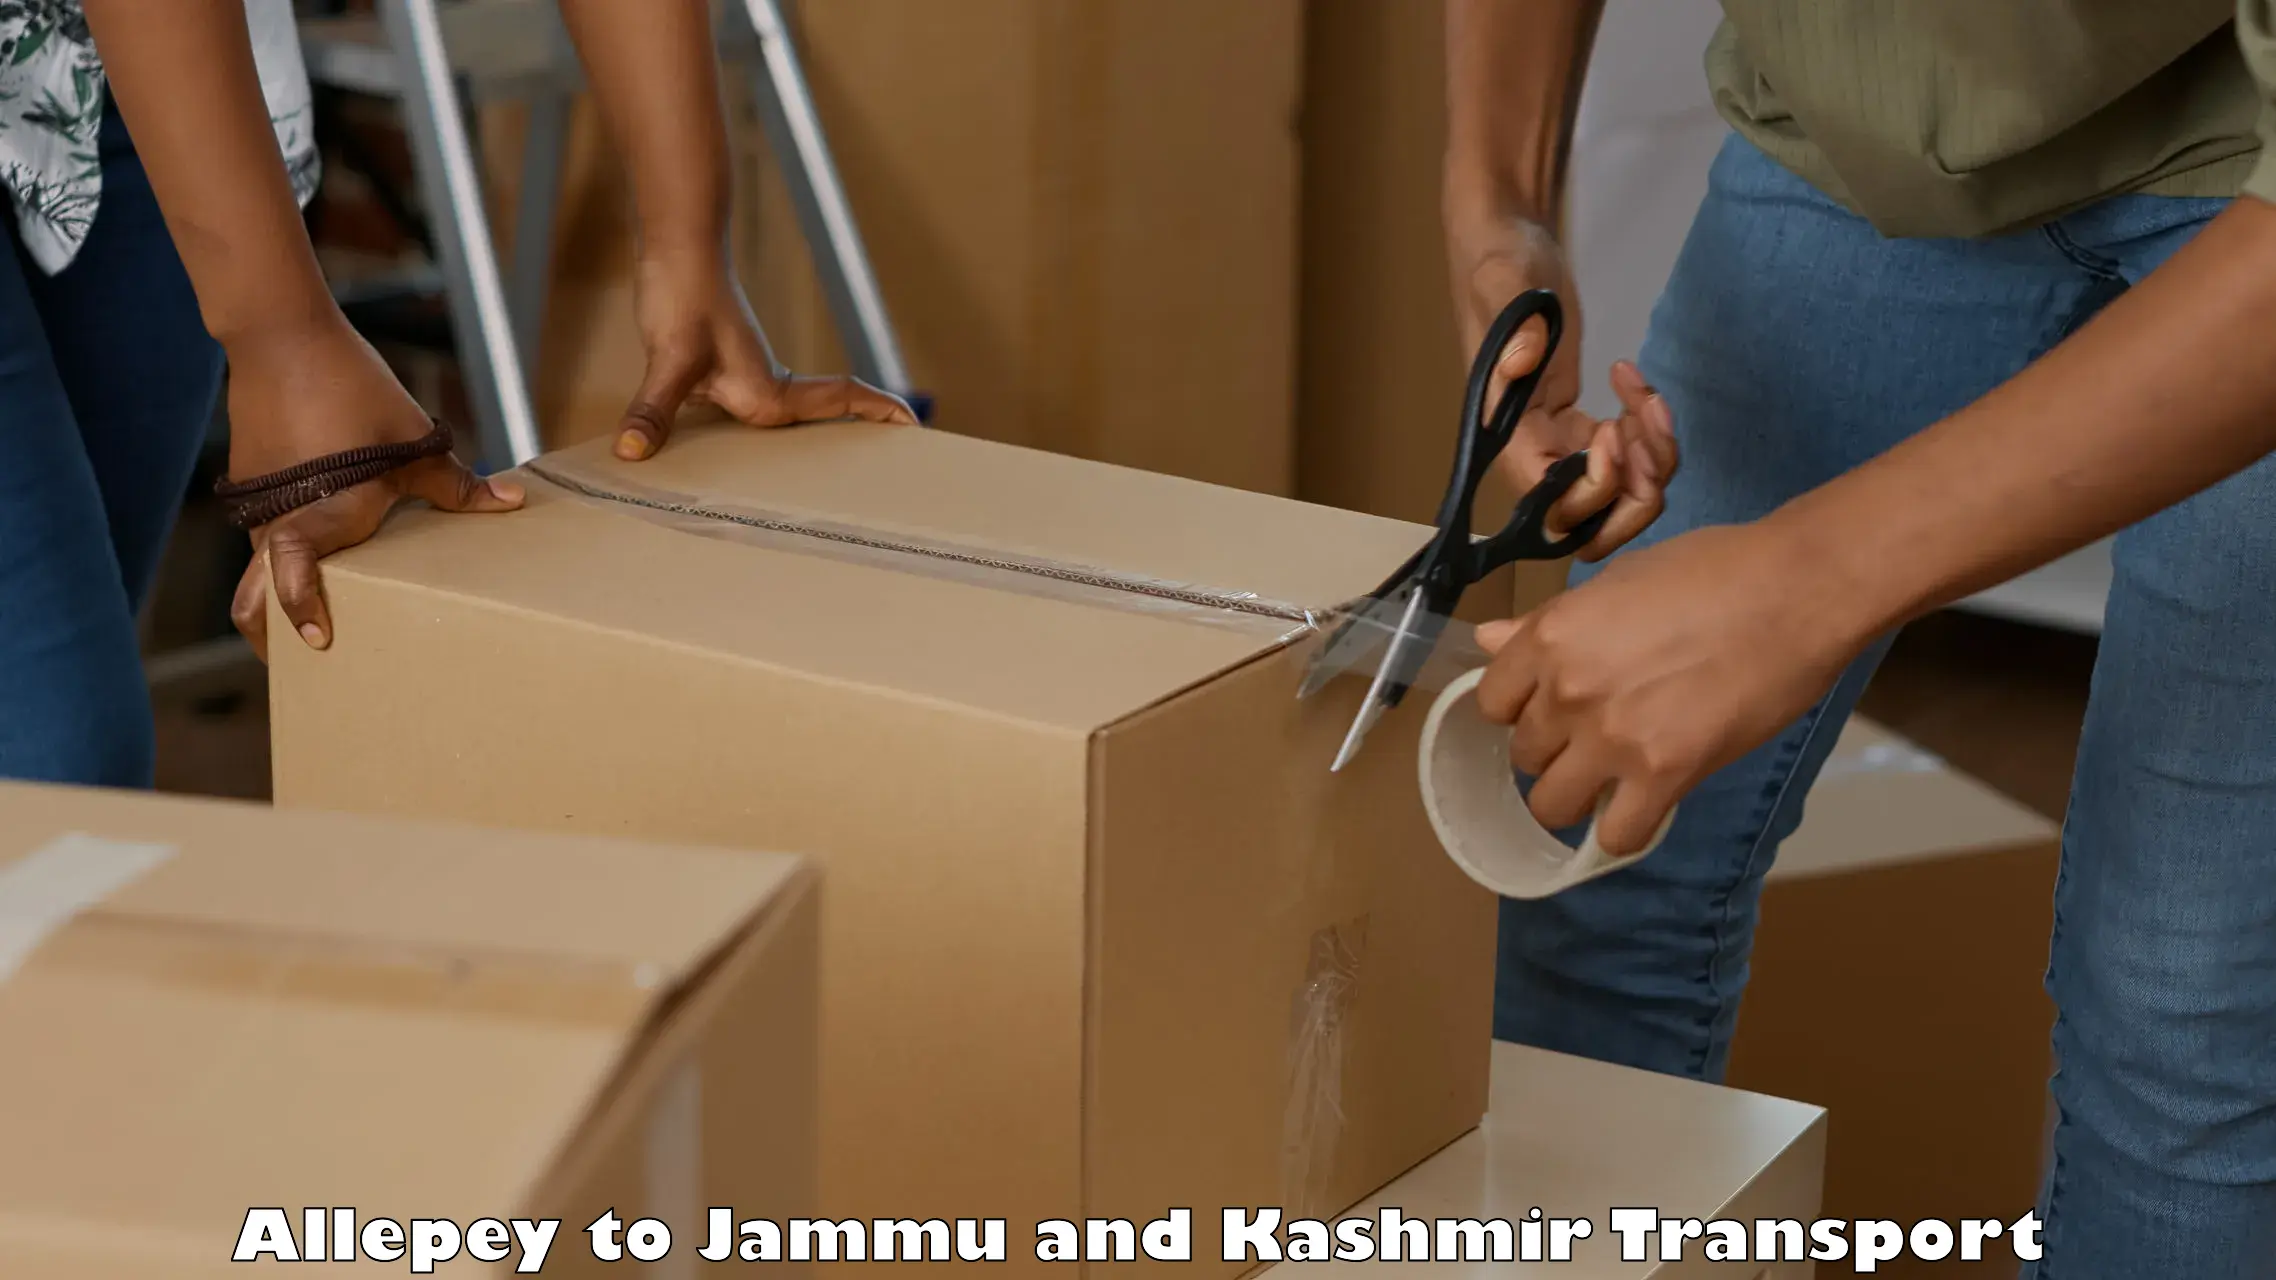 Domestic goods transportation services Allepey to Jammu and Kashmir